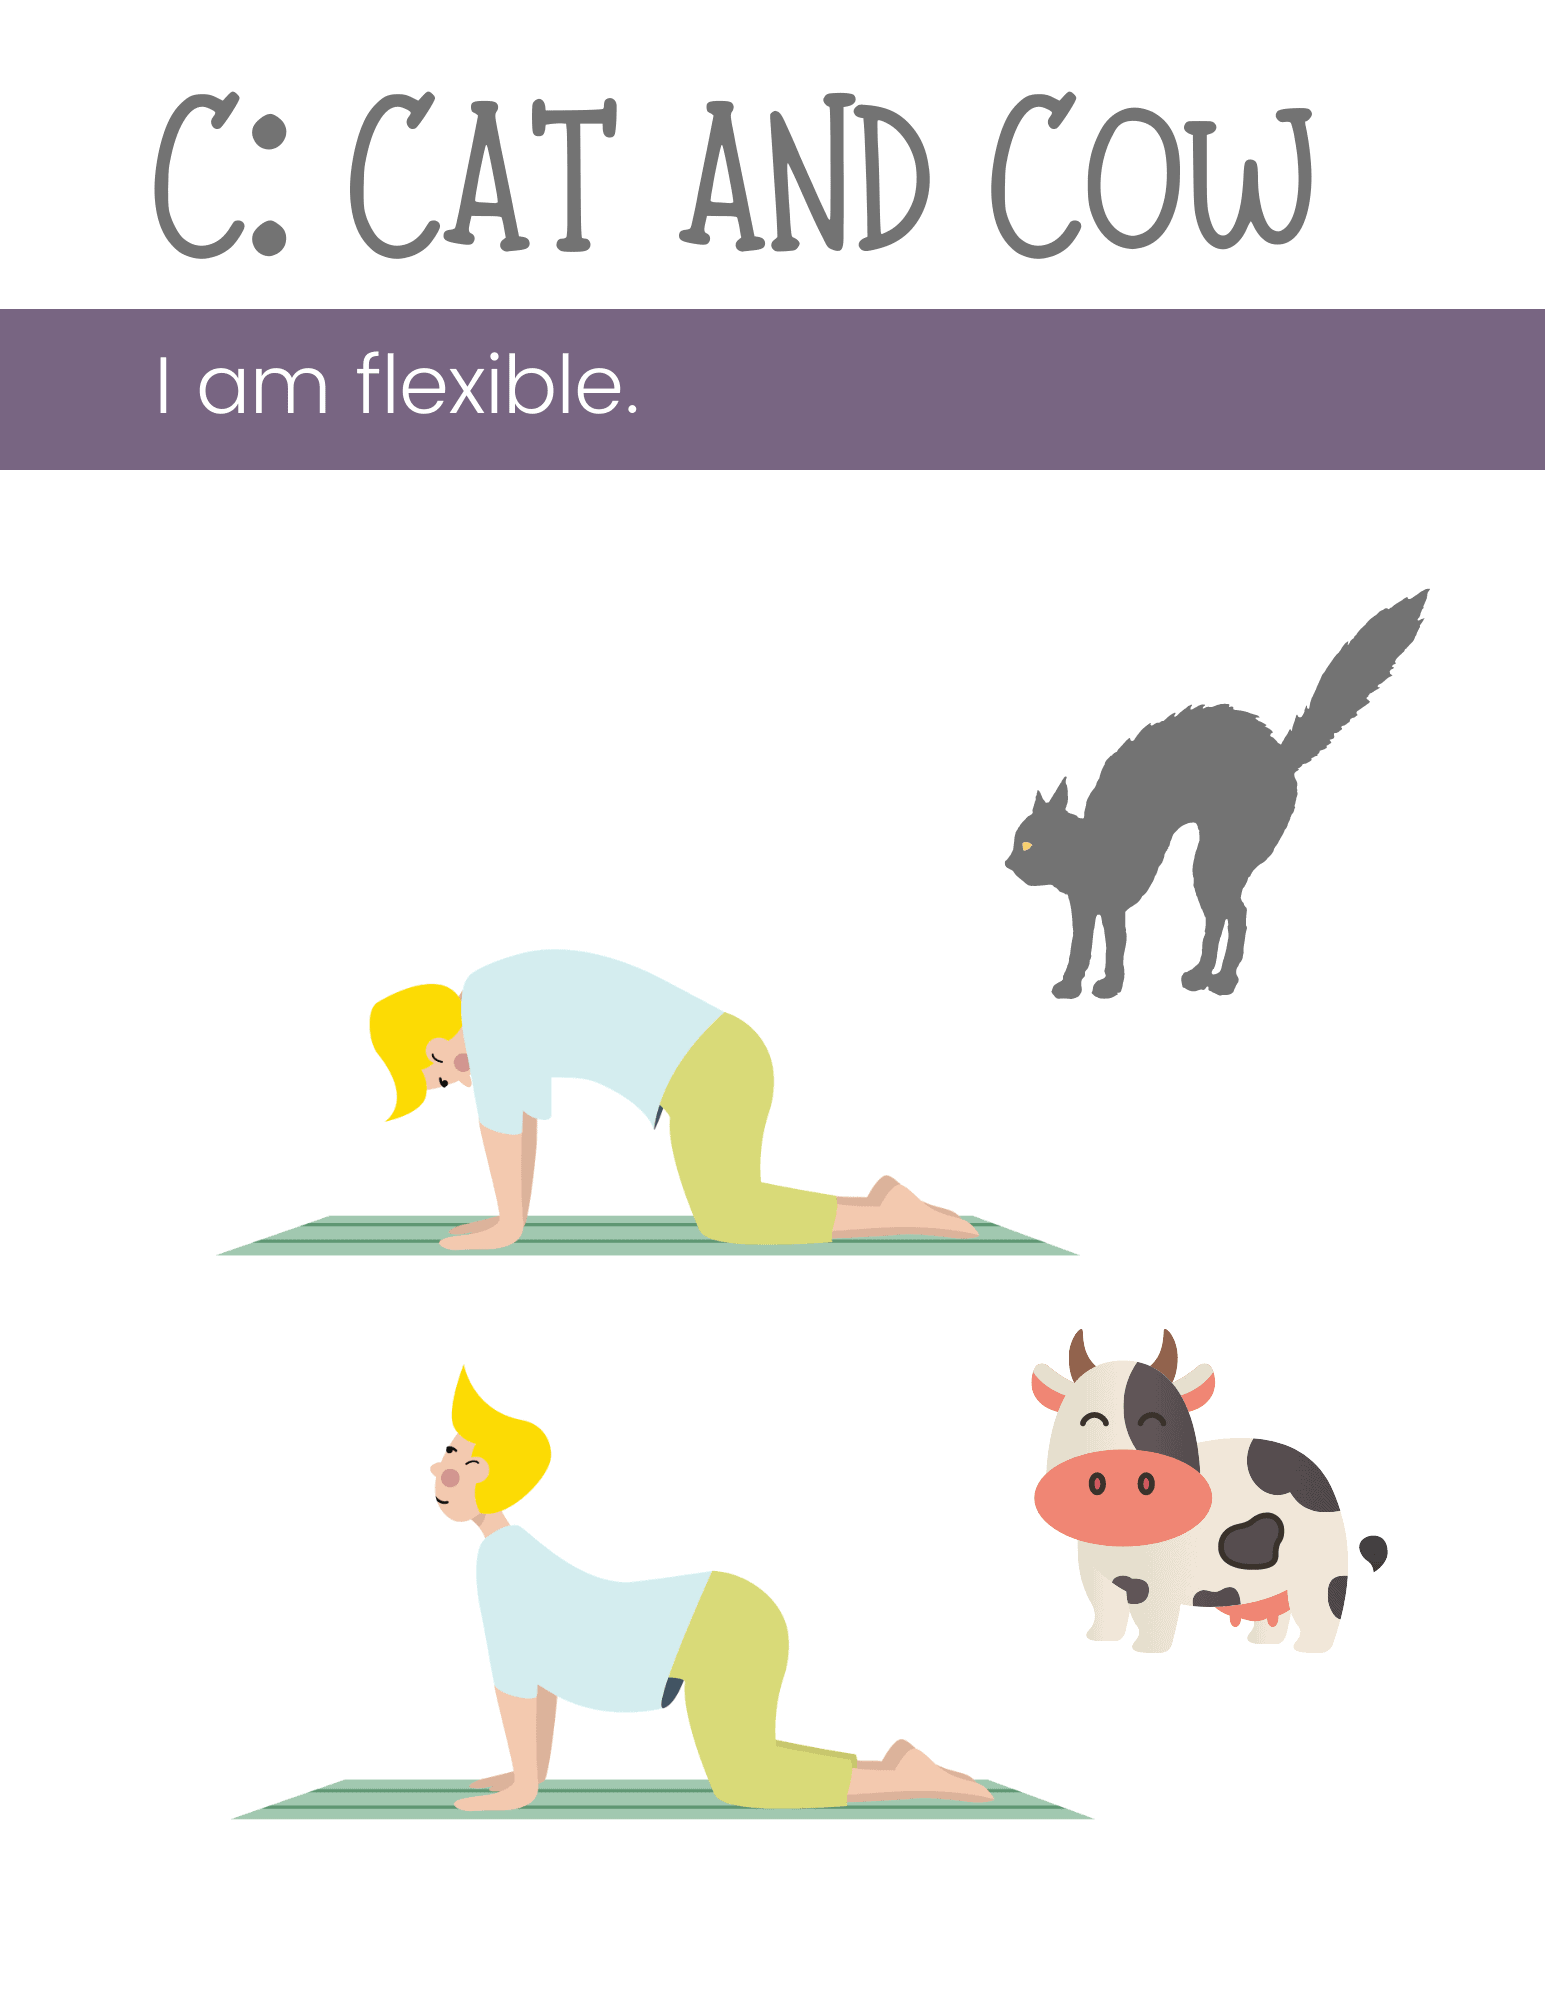 The Ultimate List of Free Yoga Pose Printables for Kids {Mindfulness  Resources} - Bits of Positivity